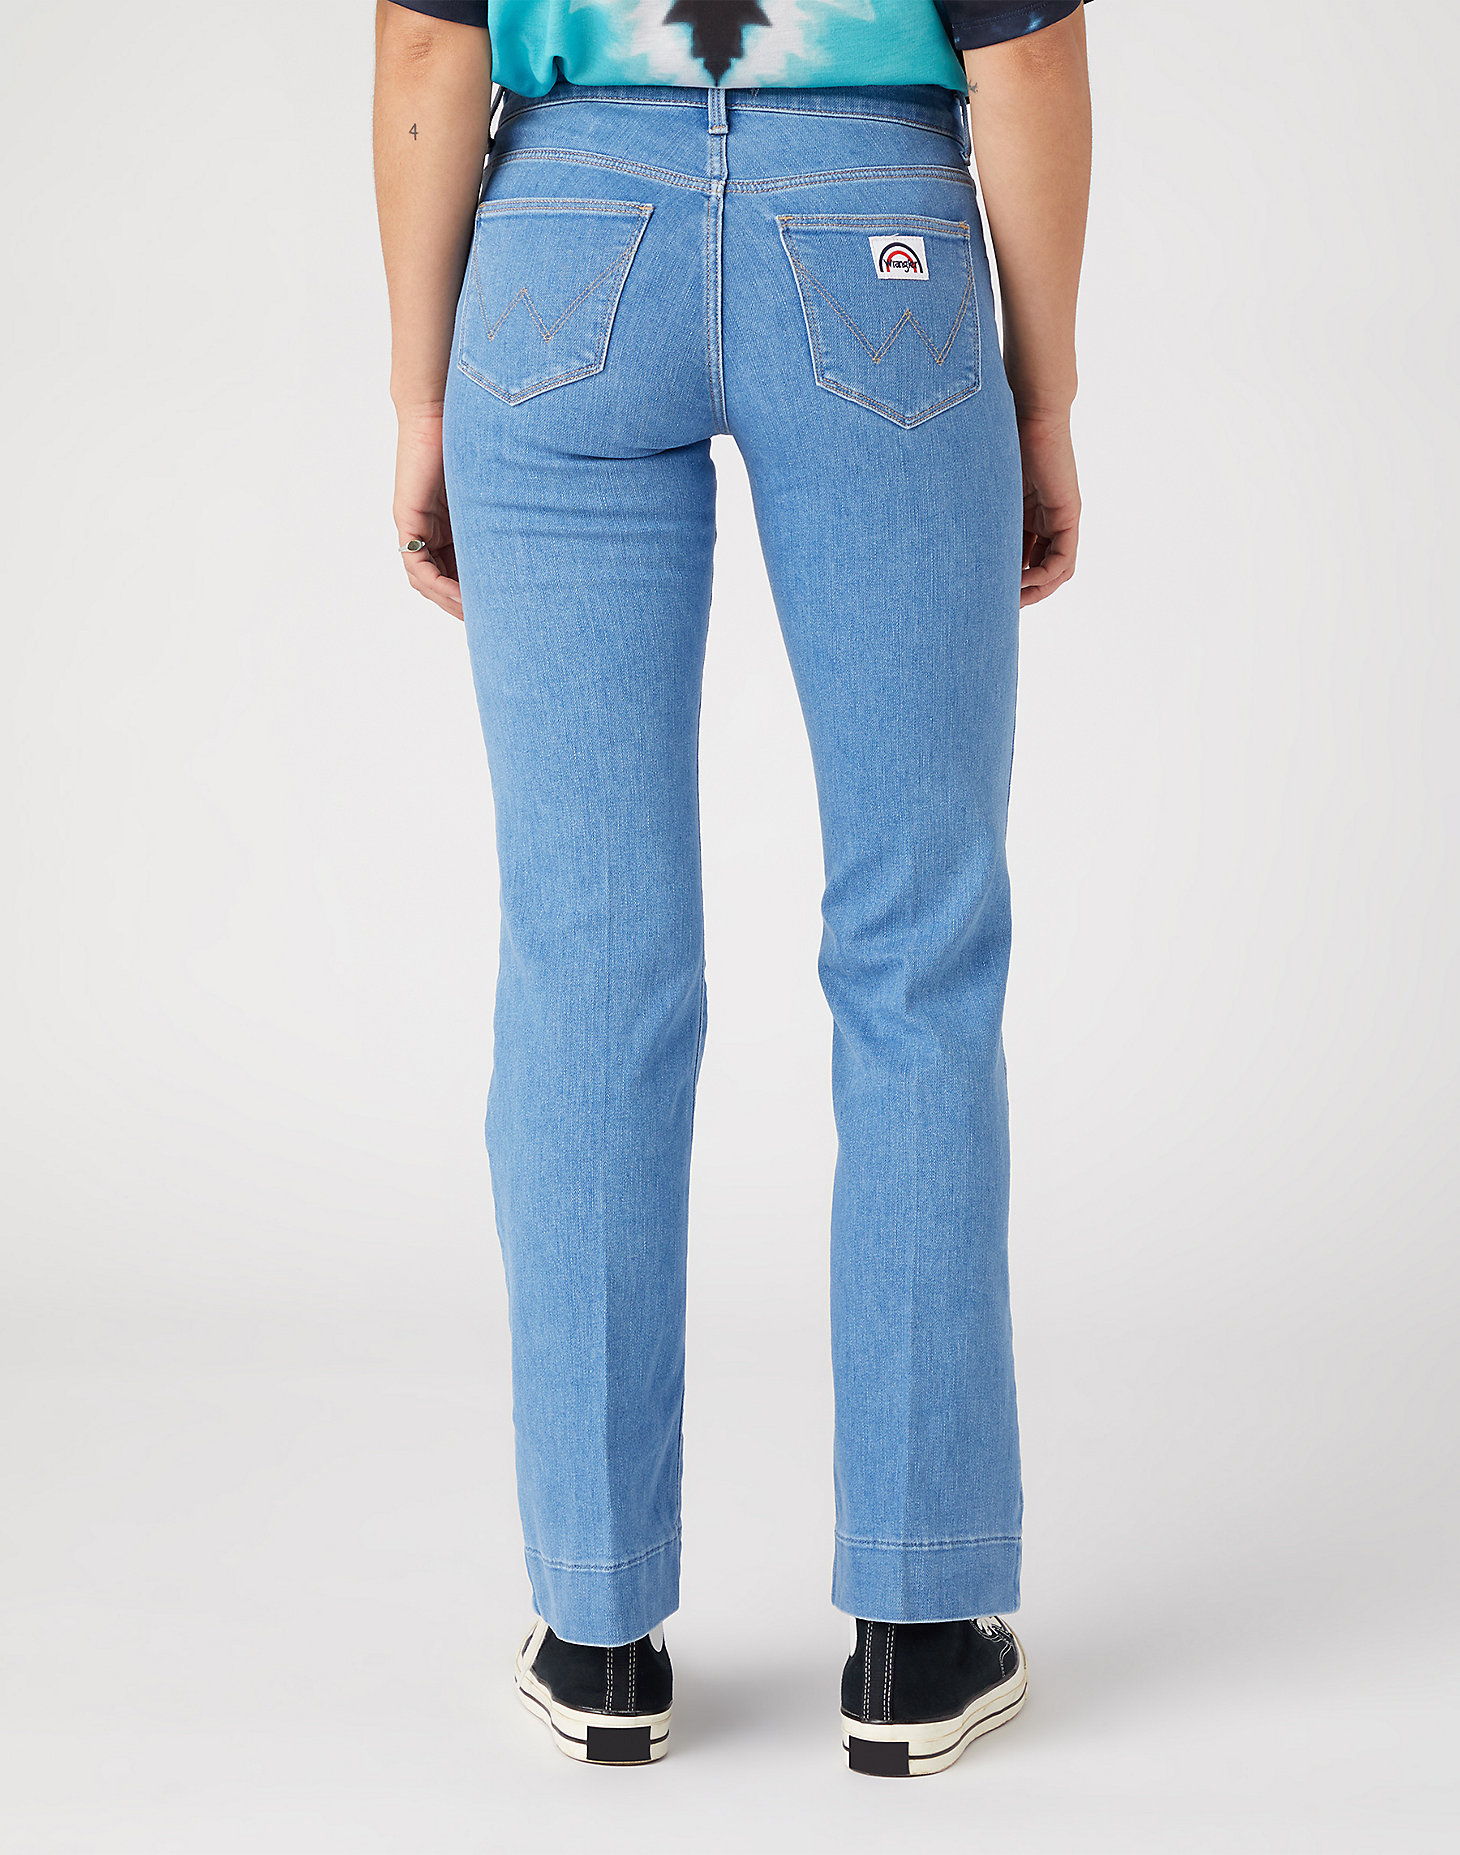 Flare Jeans in Eye Candy alternative view 2